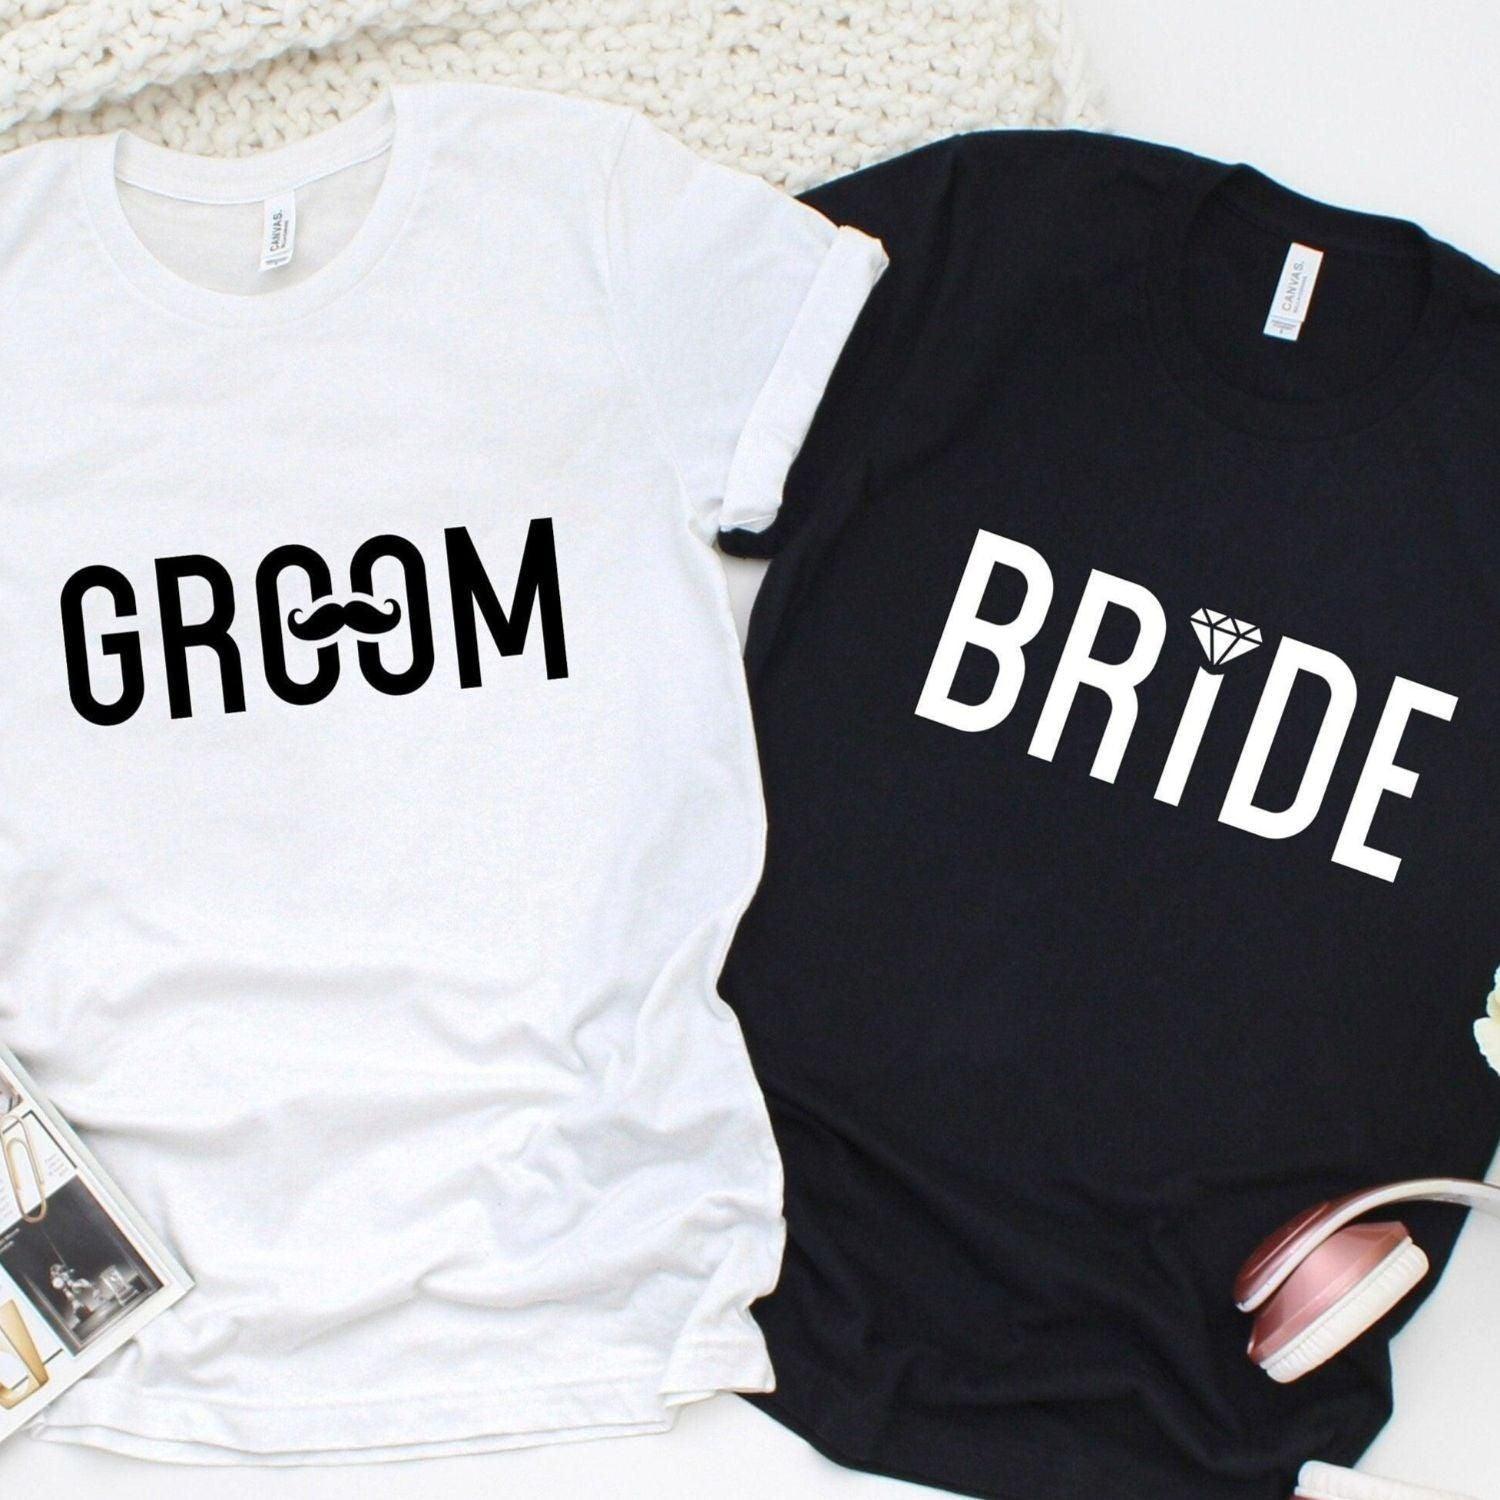 Cute Matching Outfits for Couples – Your Perfect Valentine & Honeymoon Apparel! - 4Lovebirds